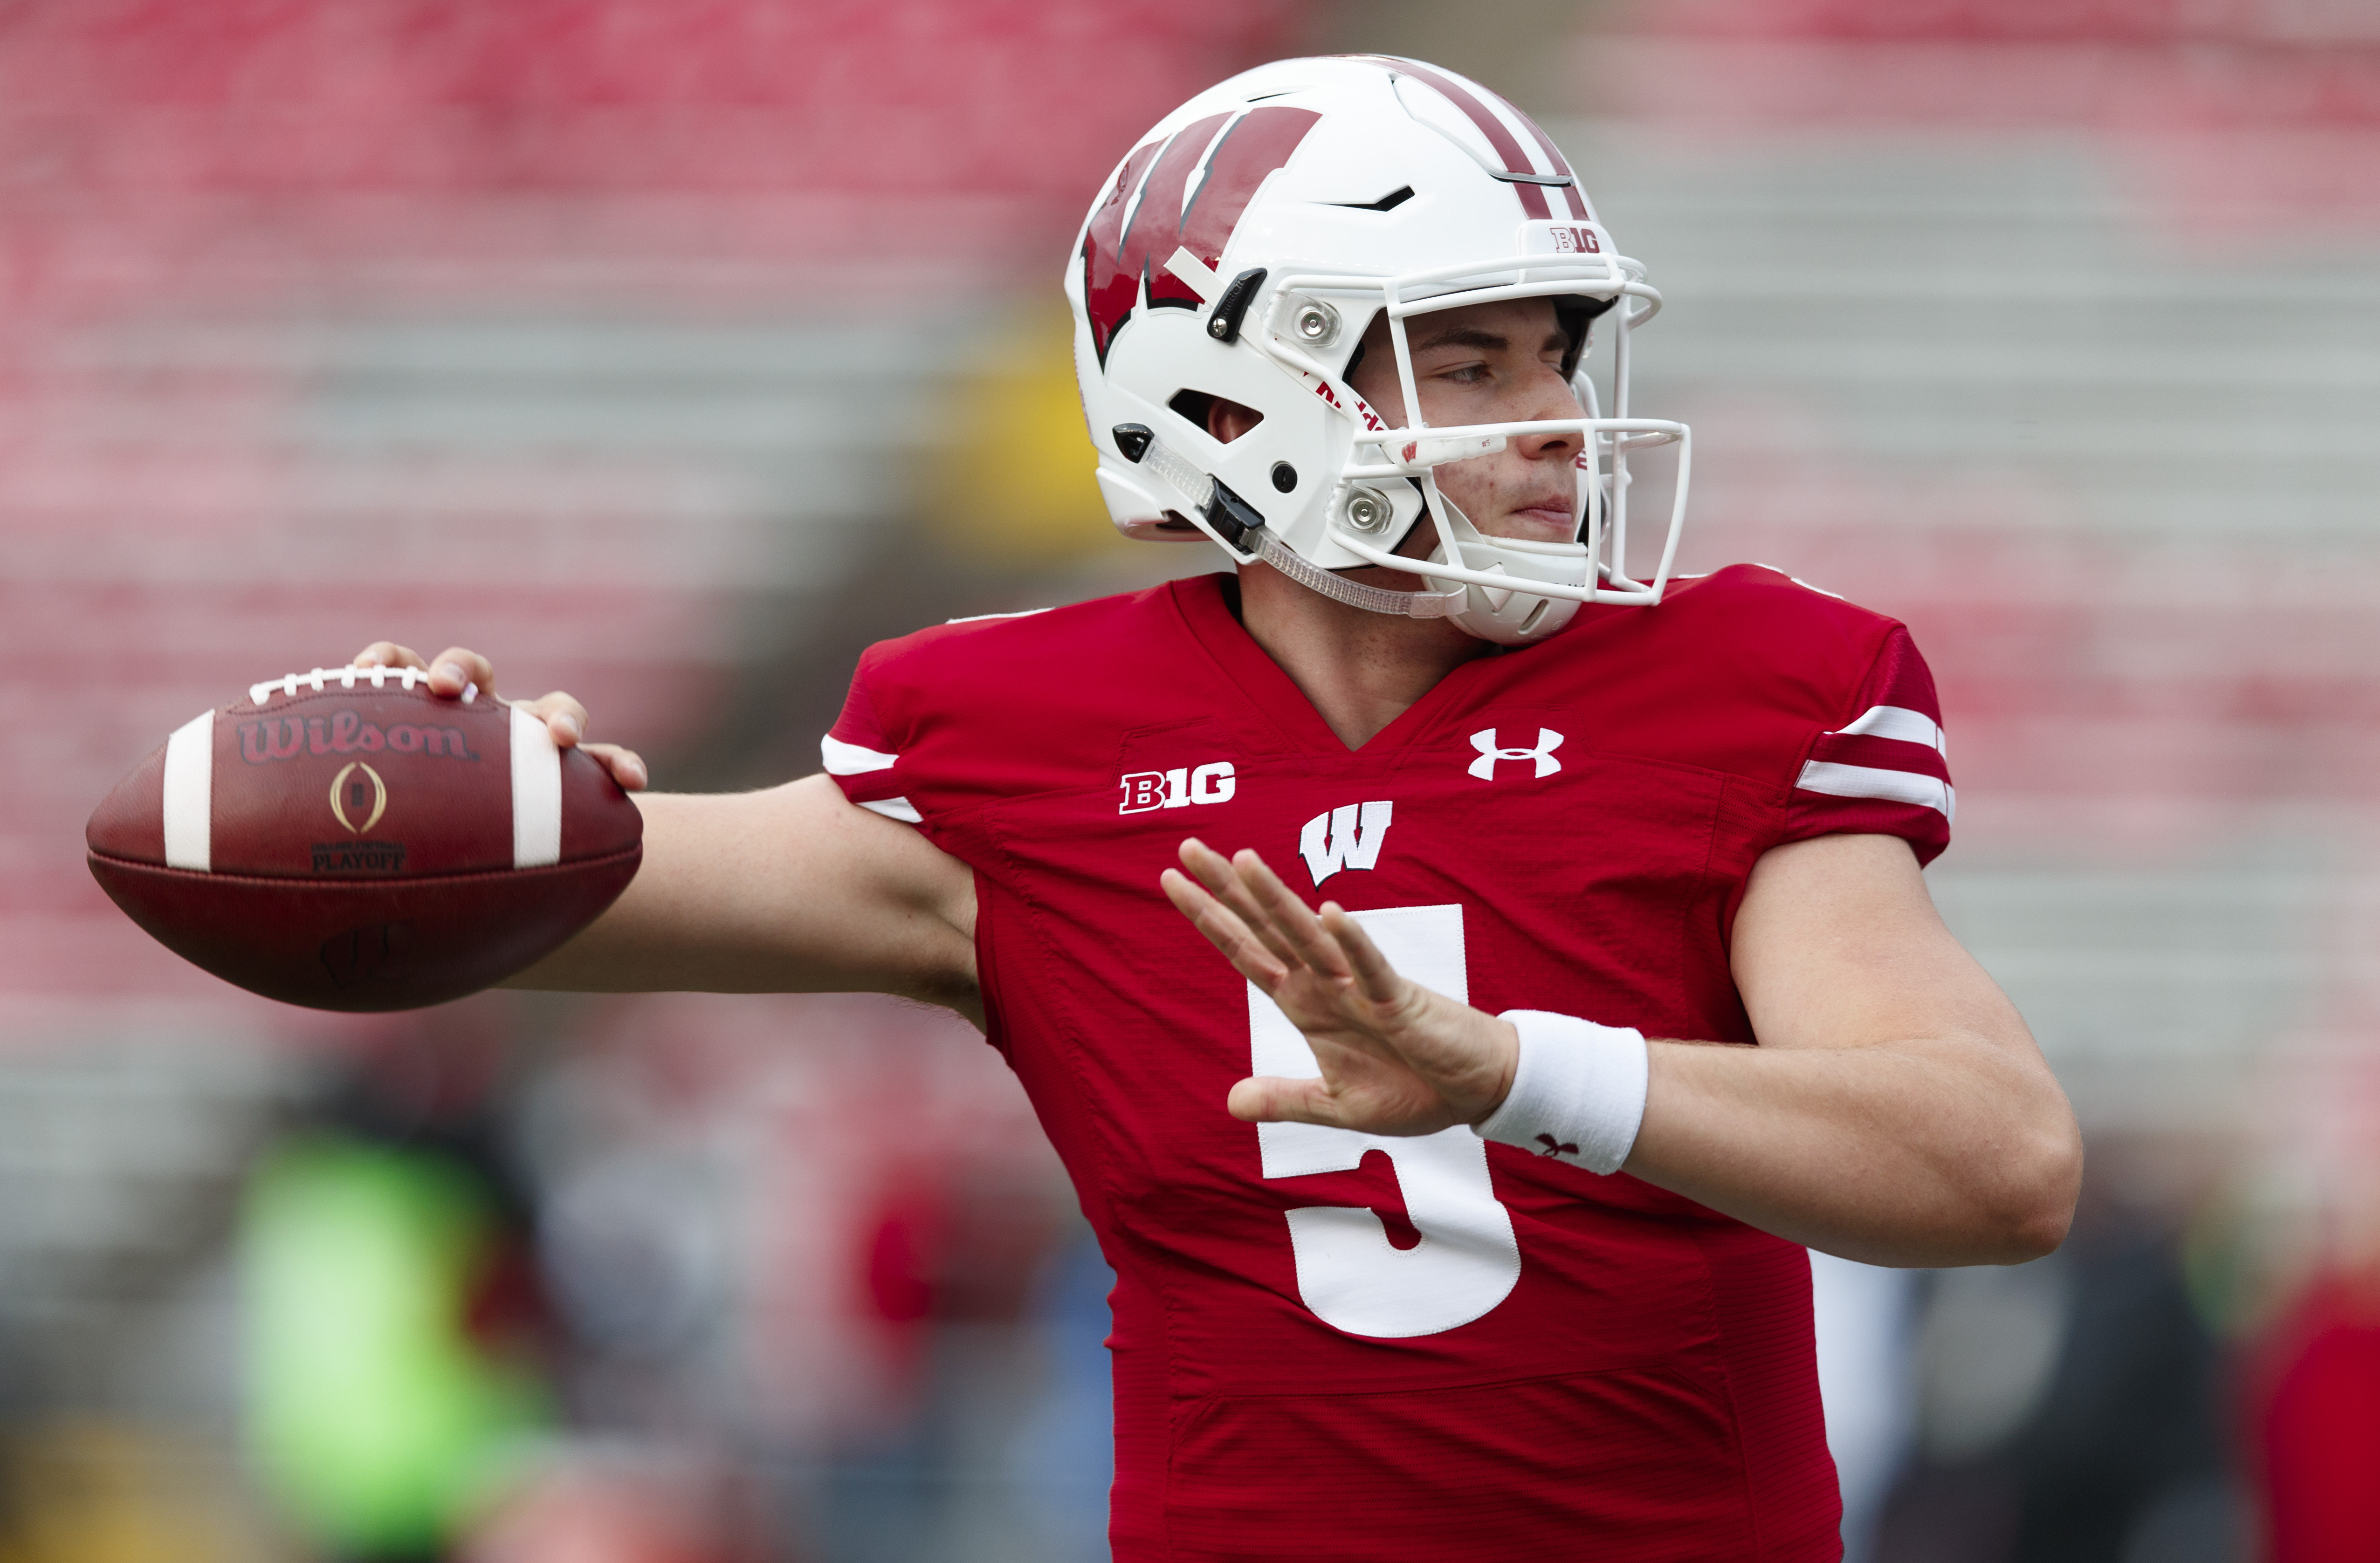 QB Graham Mertz Takes in FirstYear Experience as a Badger